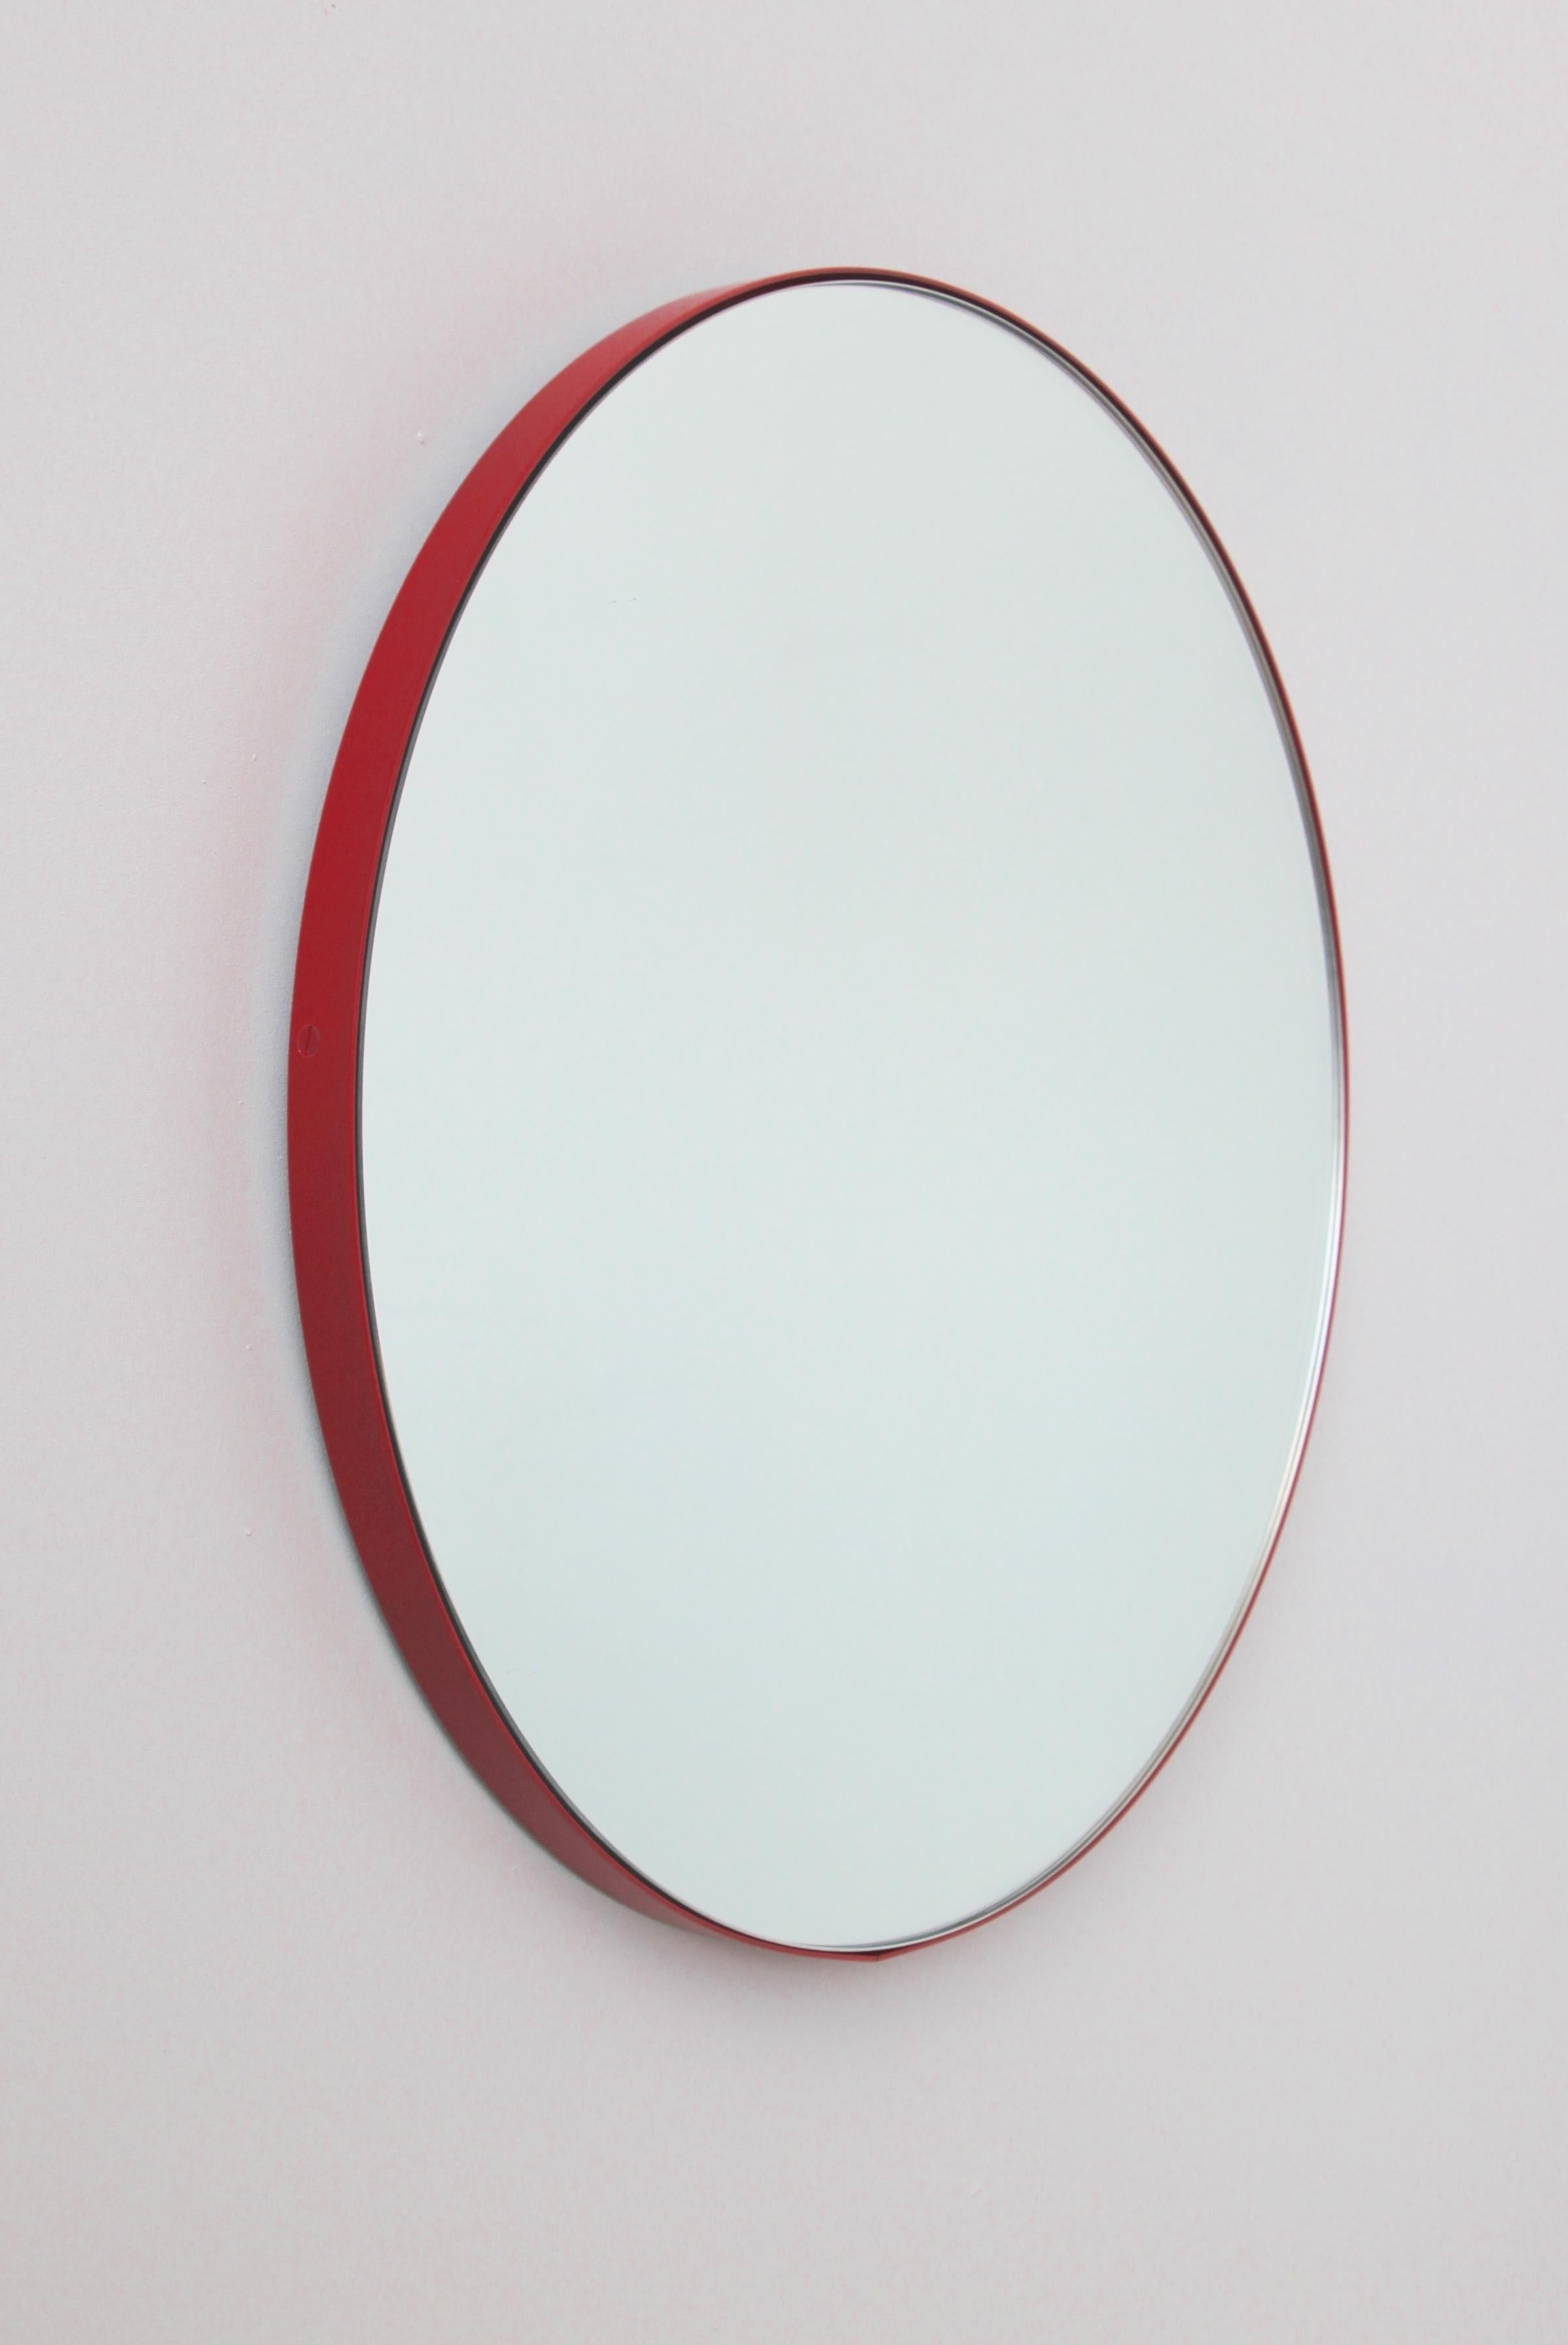 Orbis Round Modern Mirror with Handcrafted Red Frame, XL For Sale 3